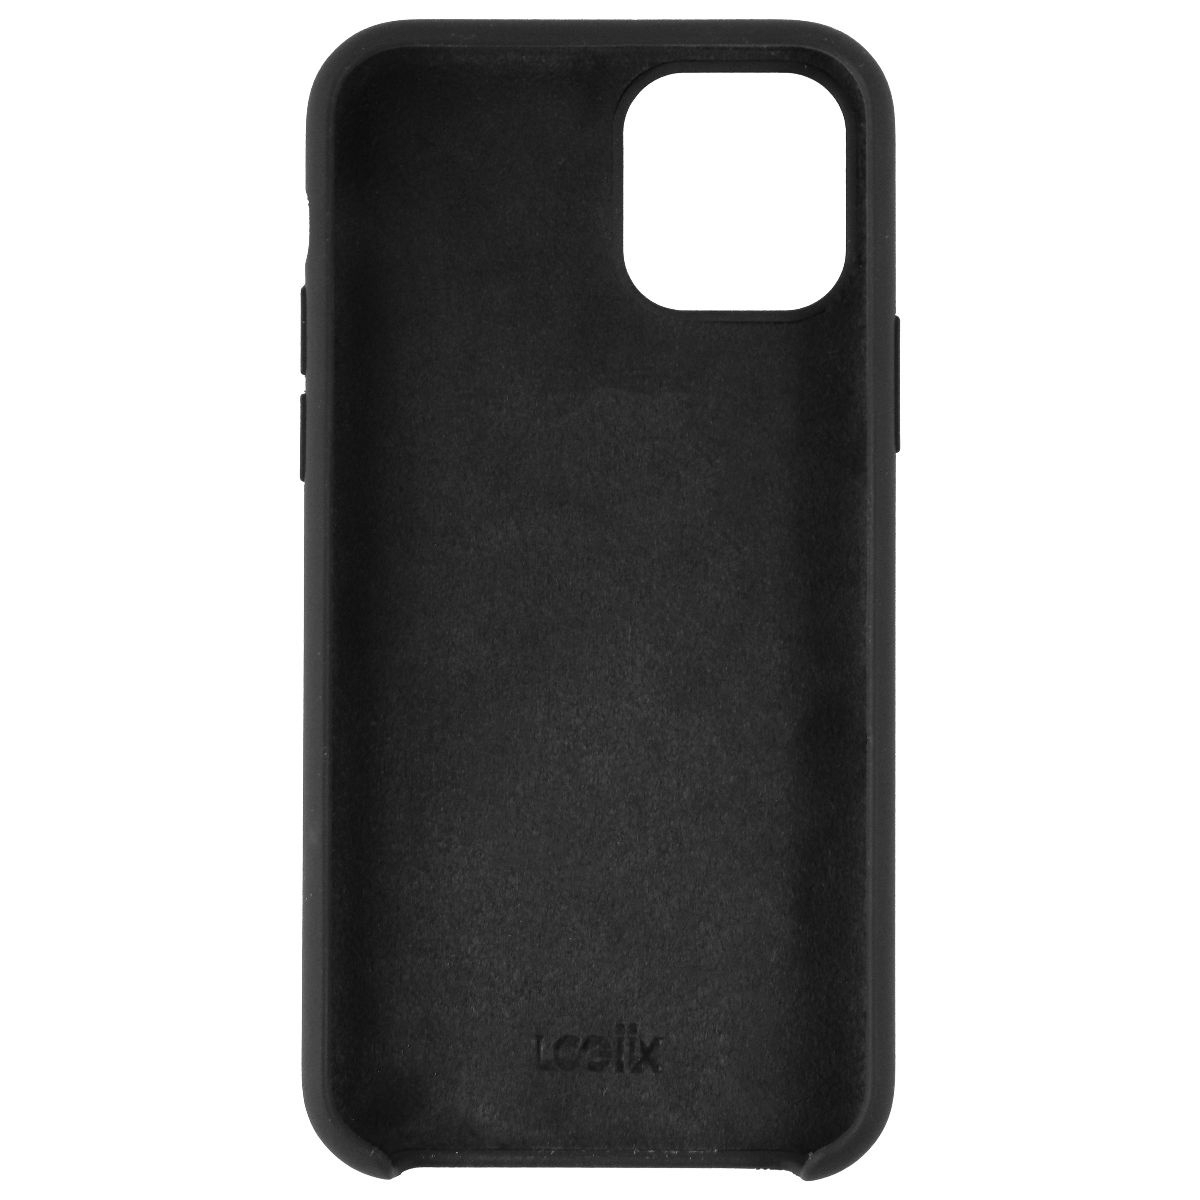 LOGiiX Silicone Slim Protective Case For Apple IPhone 11 Pro - Black